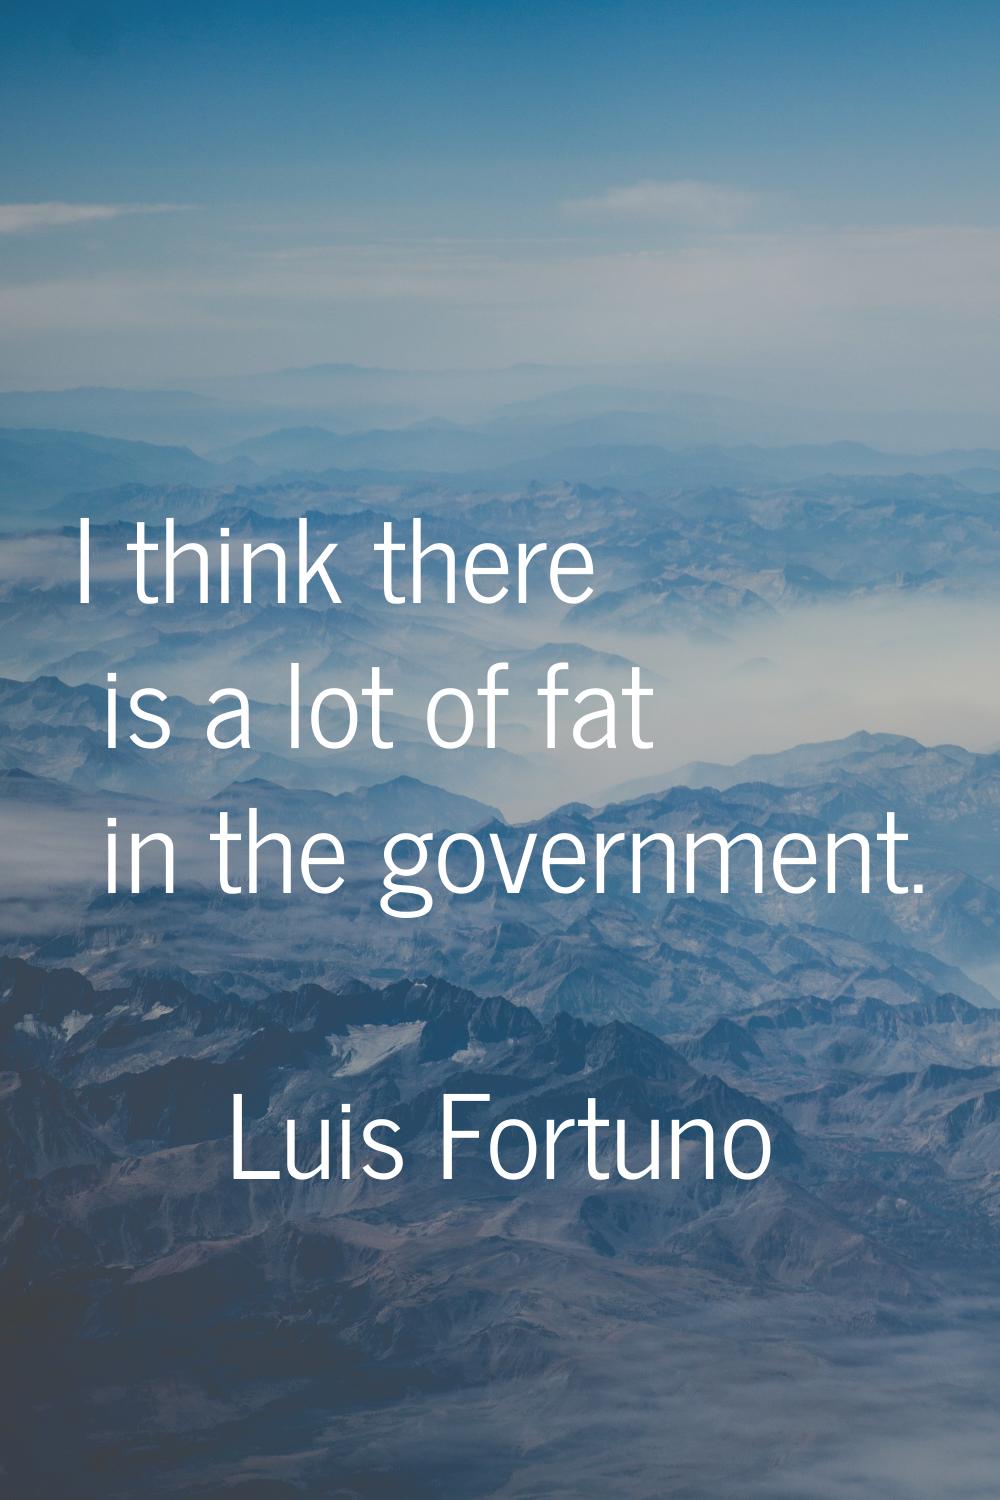 I think there is a lot of fat in the government.